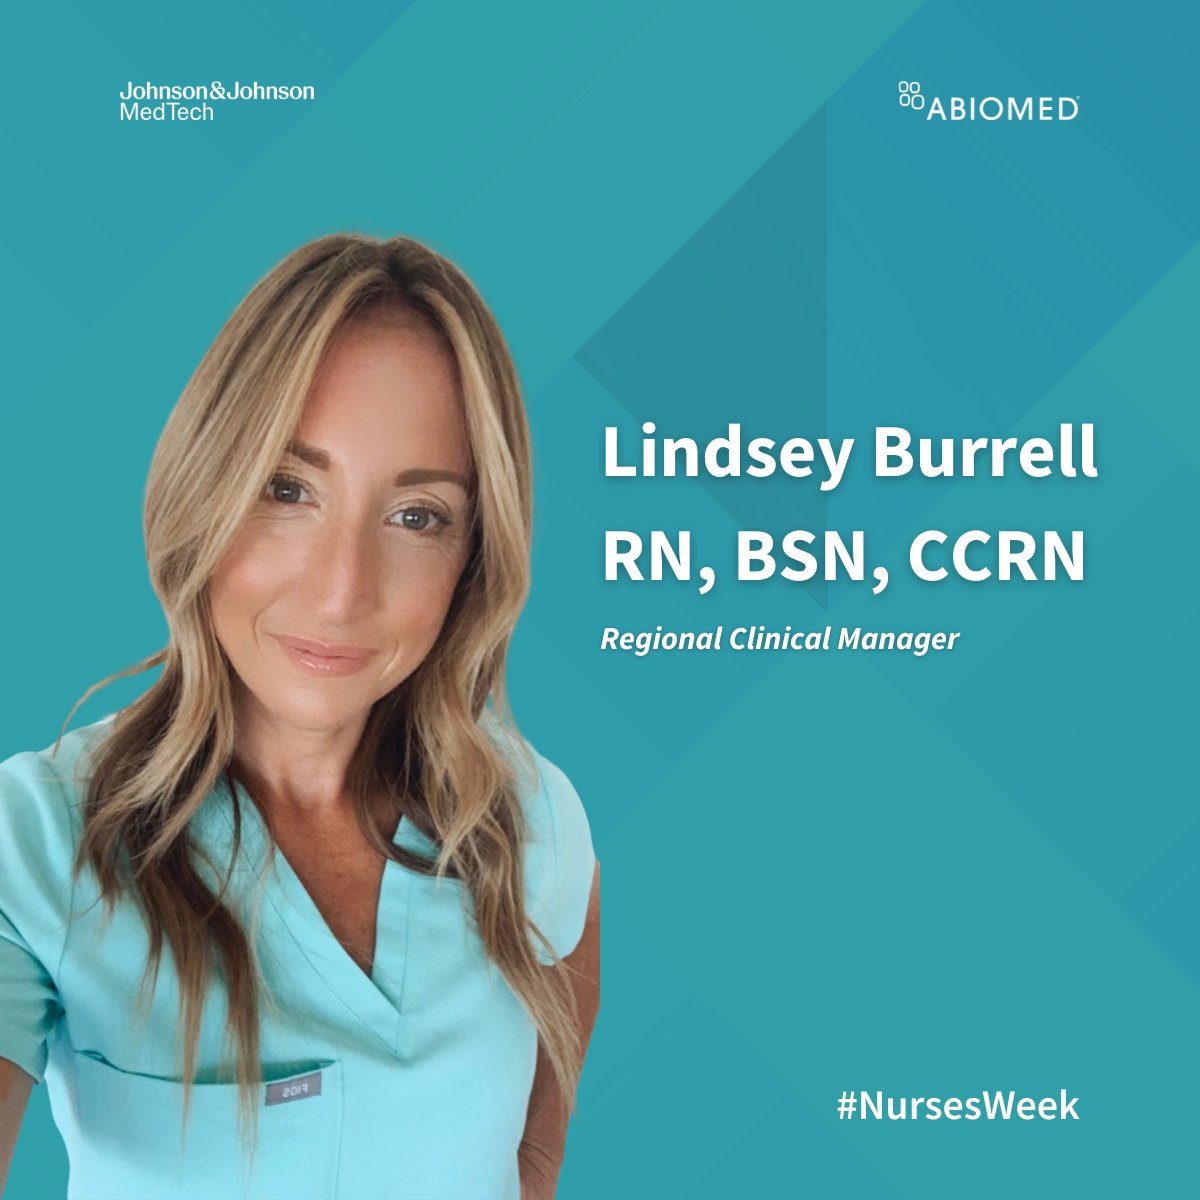 The next RN we're highlighting for #NursesWeek is Lindsey -  an amazing member of our team. #patientsfirst